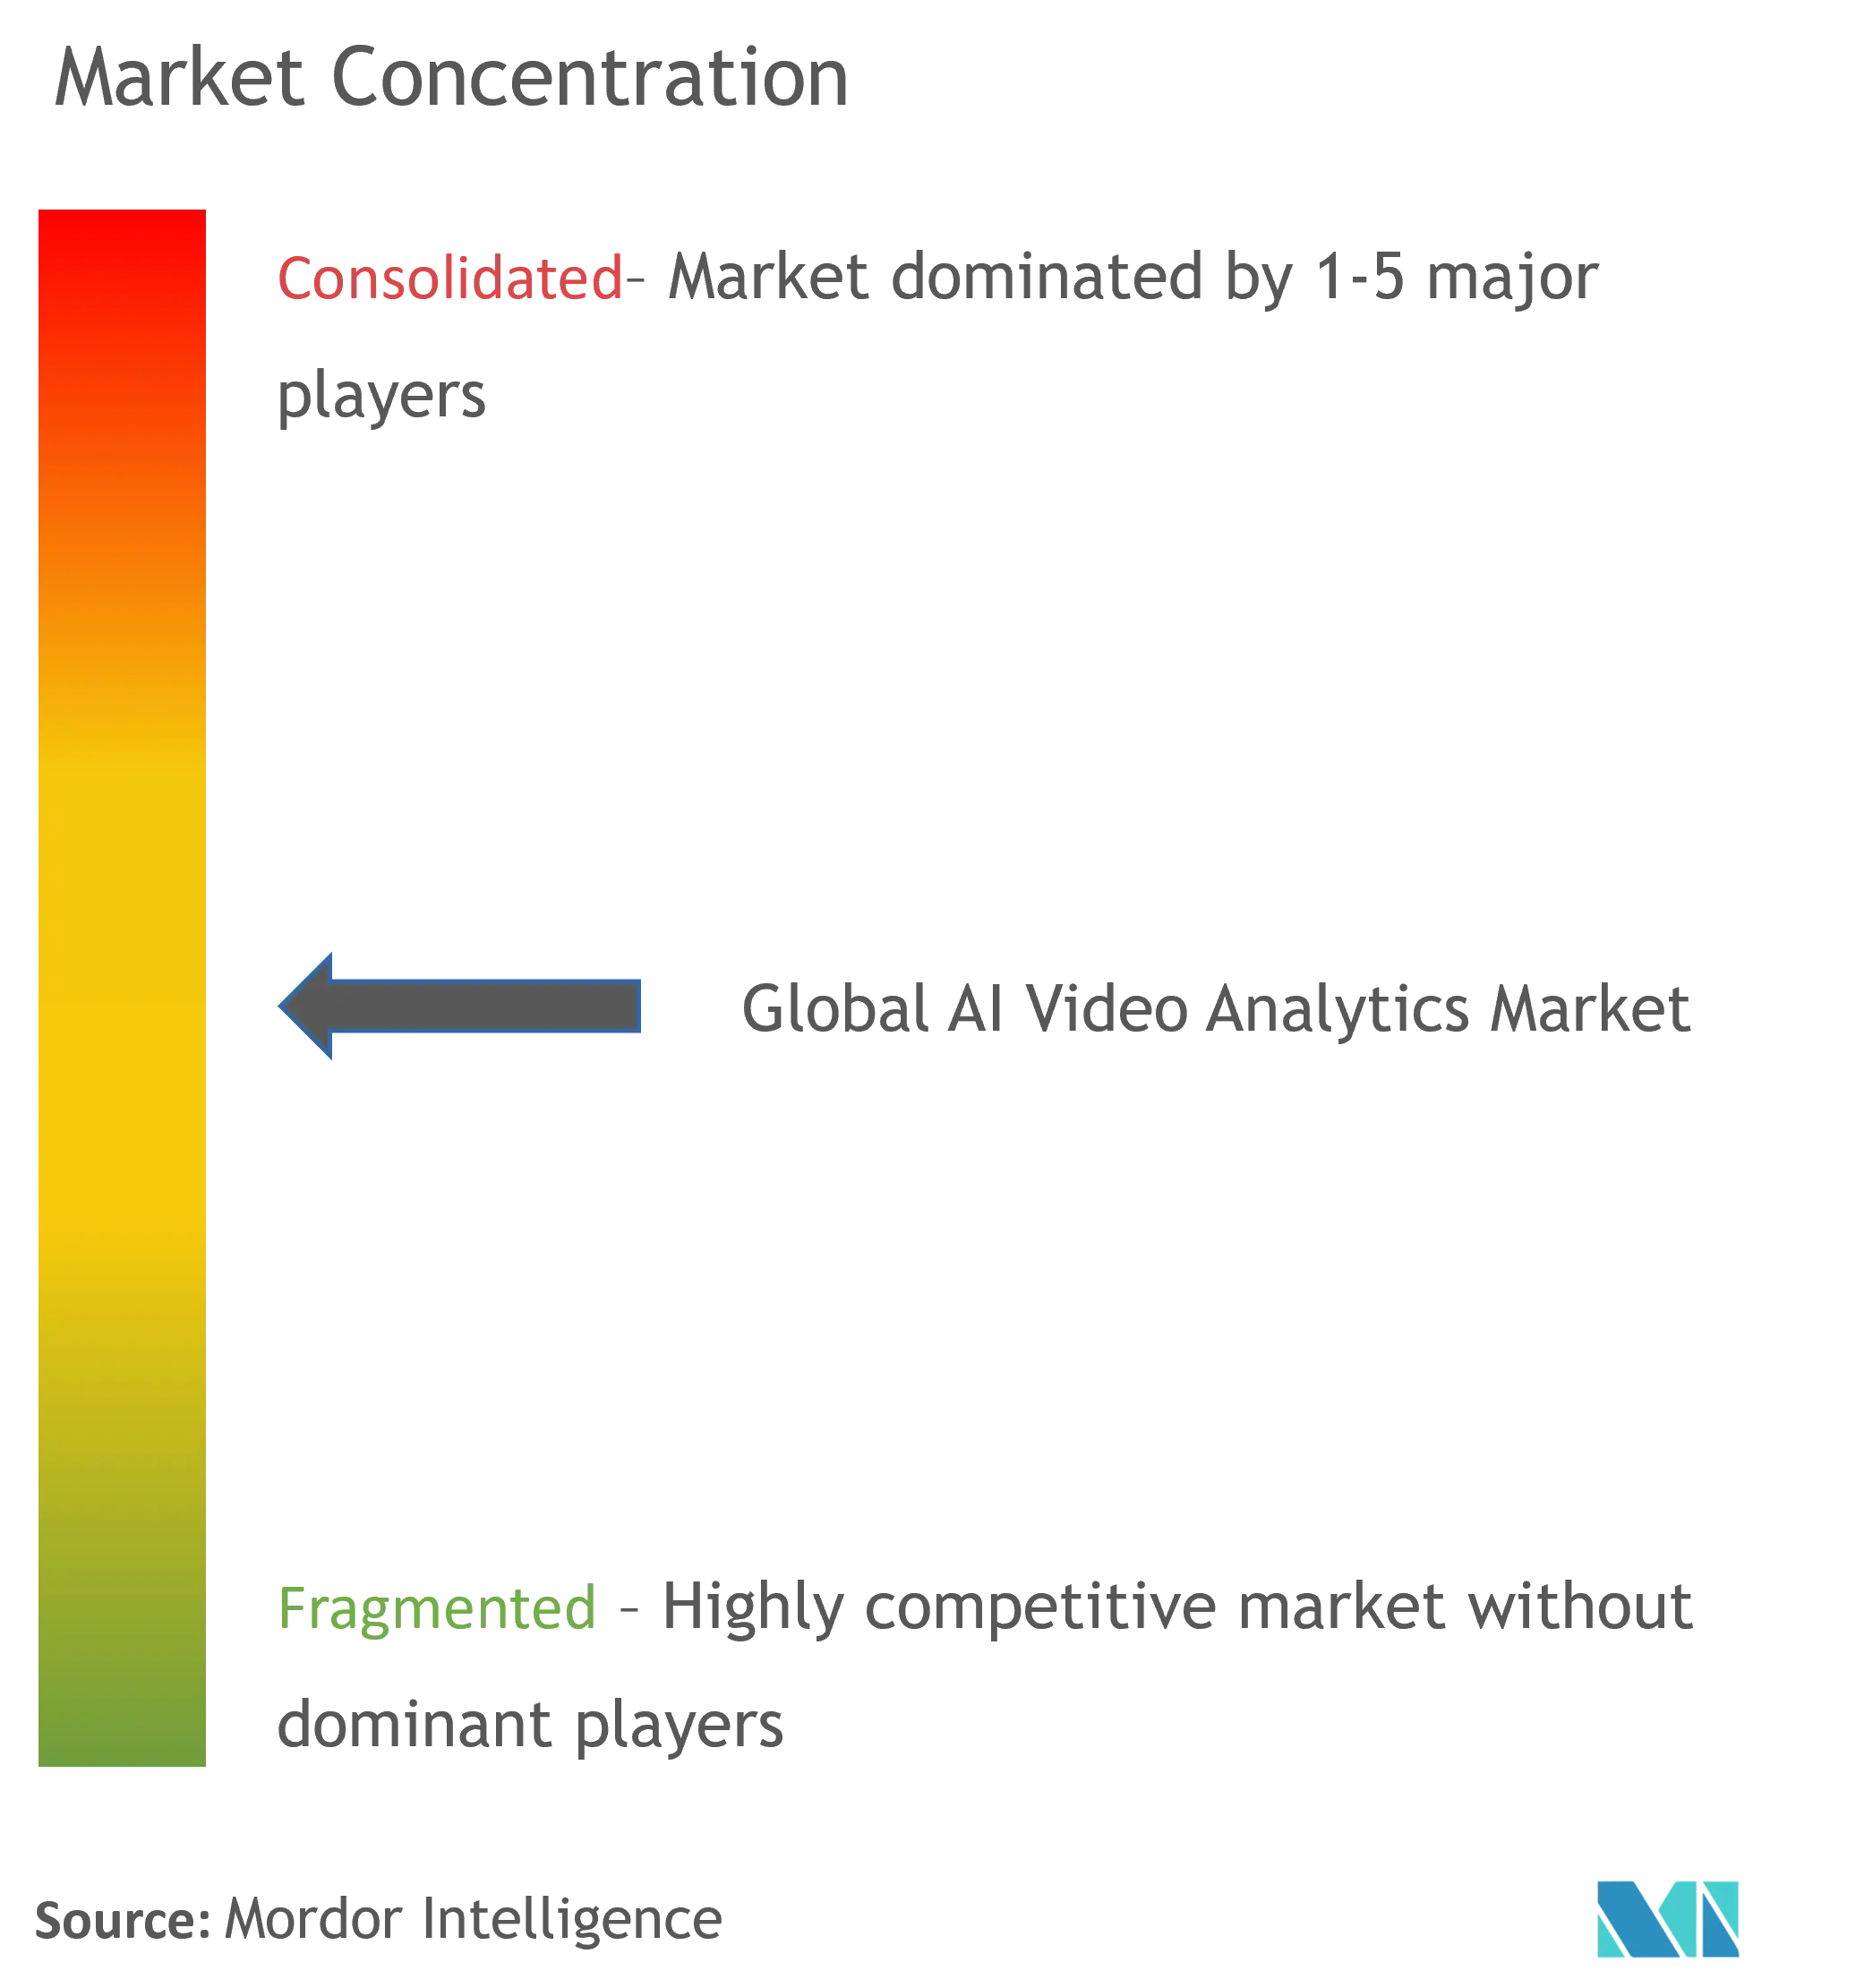 AI Video Analytics Market Concentration